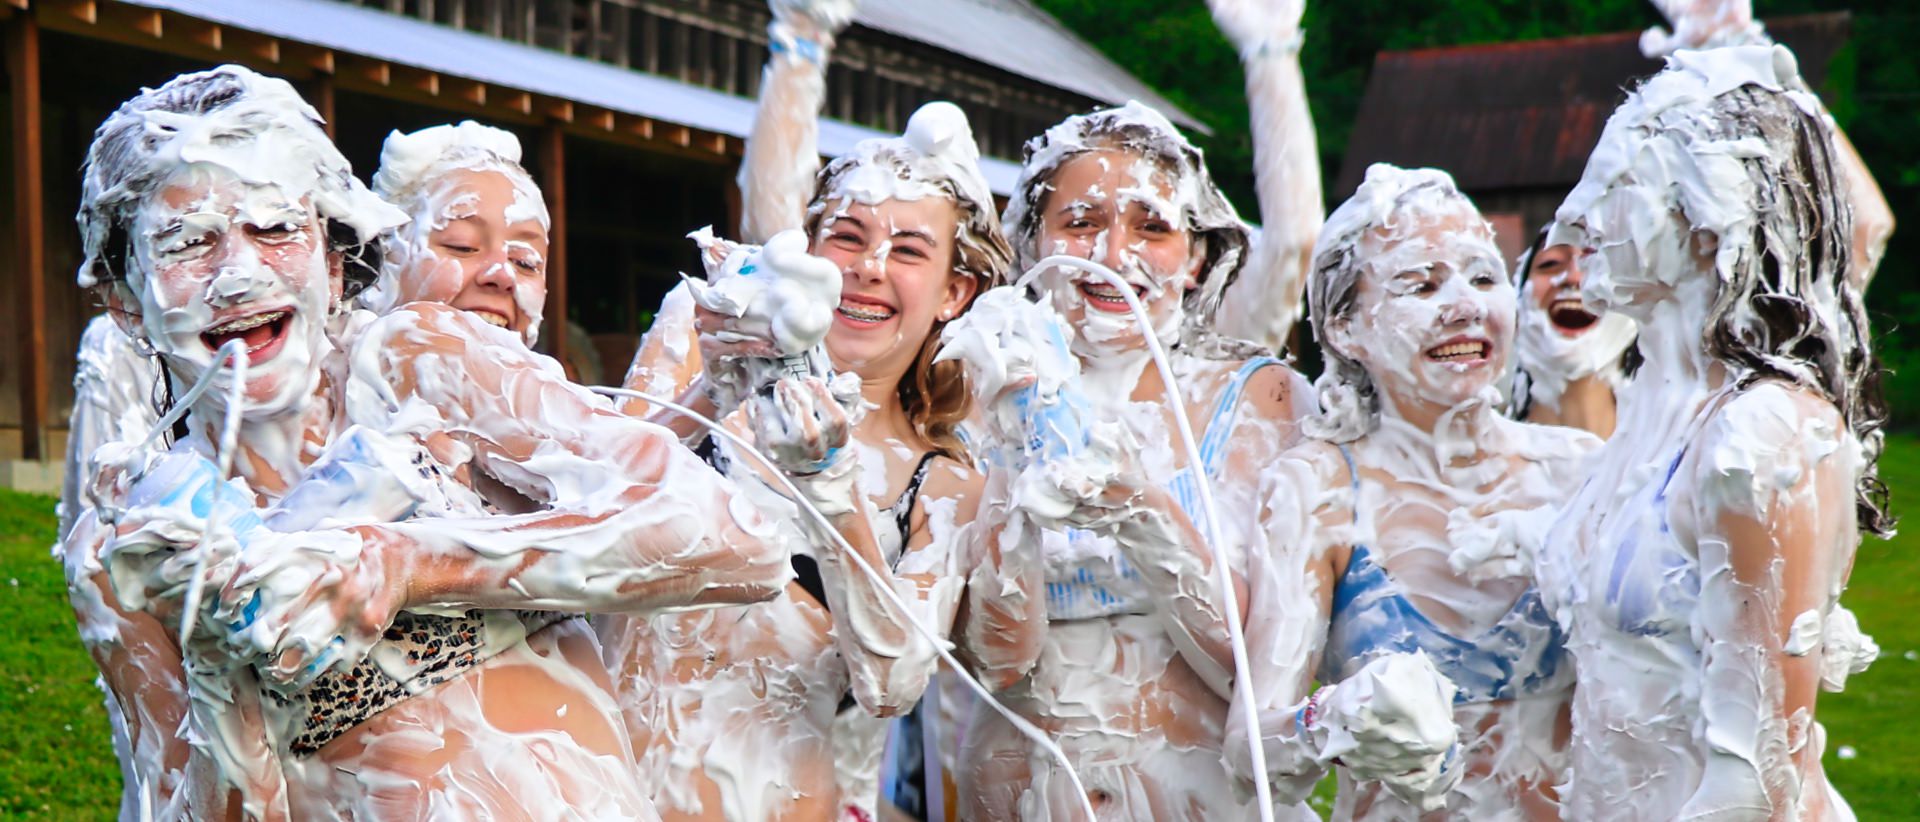 christopher lancaster recommends girls covered in shaving cream pic